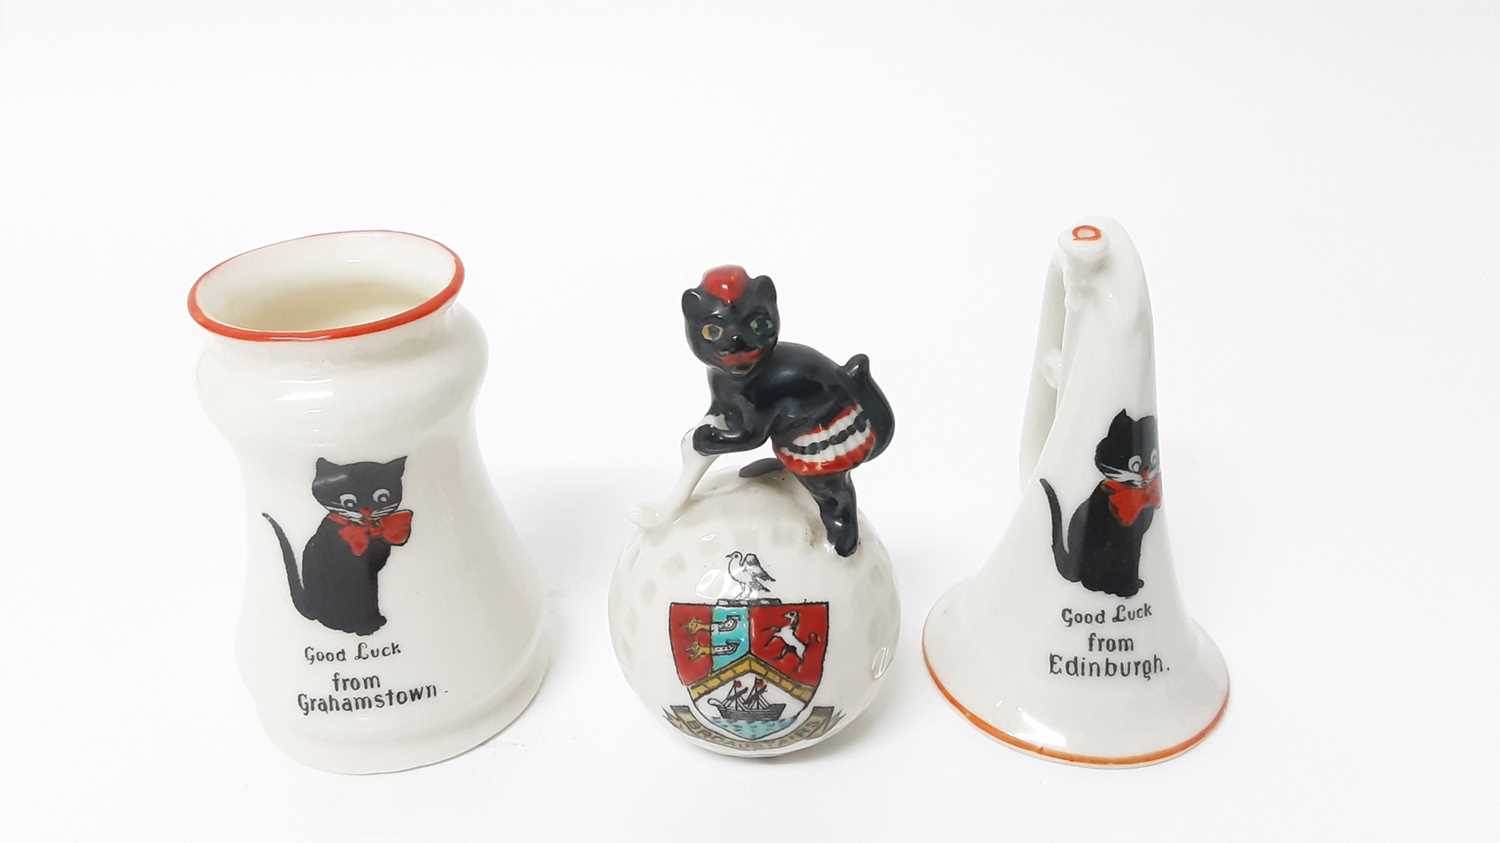 Lot 153 - Two Willow Art Crested China Black Cats - one on top of a golf ball, Broadstairs, the other in the form of a bugle, Good Luck from Edinburgh, together with Disa Art Black Cat - Good Luck from Graha...